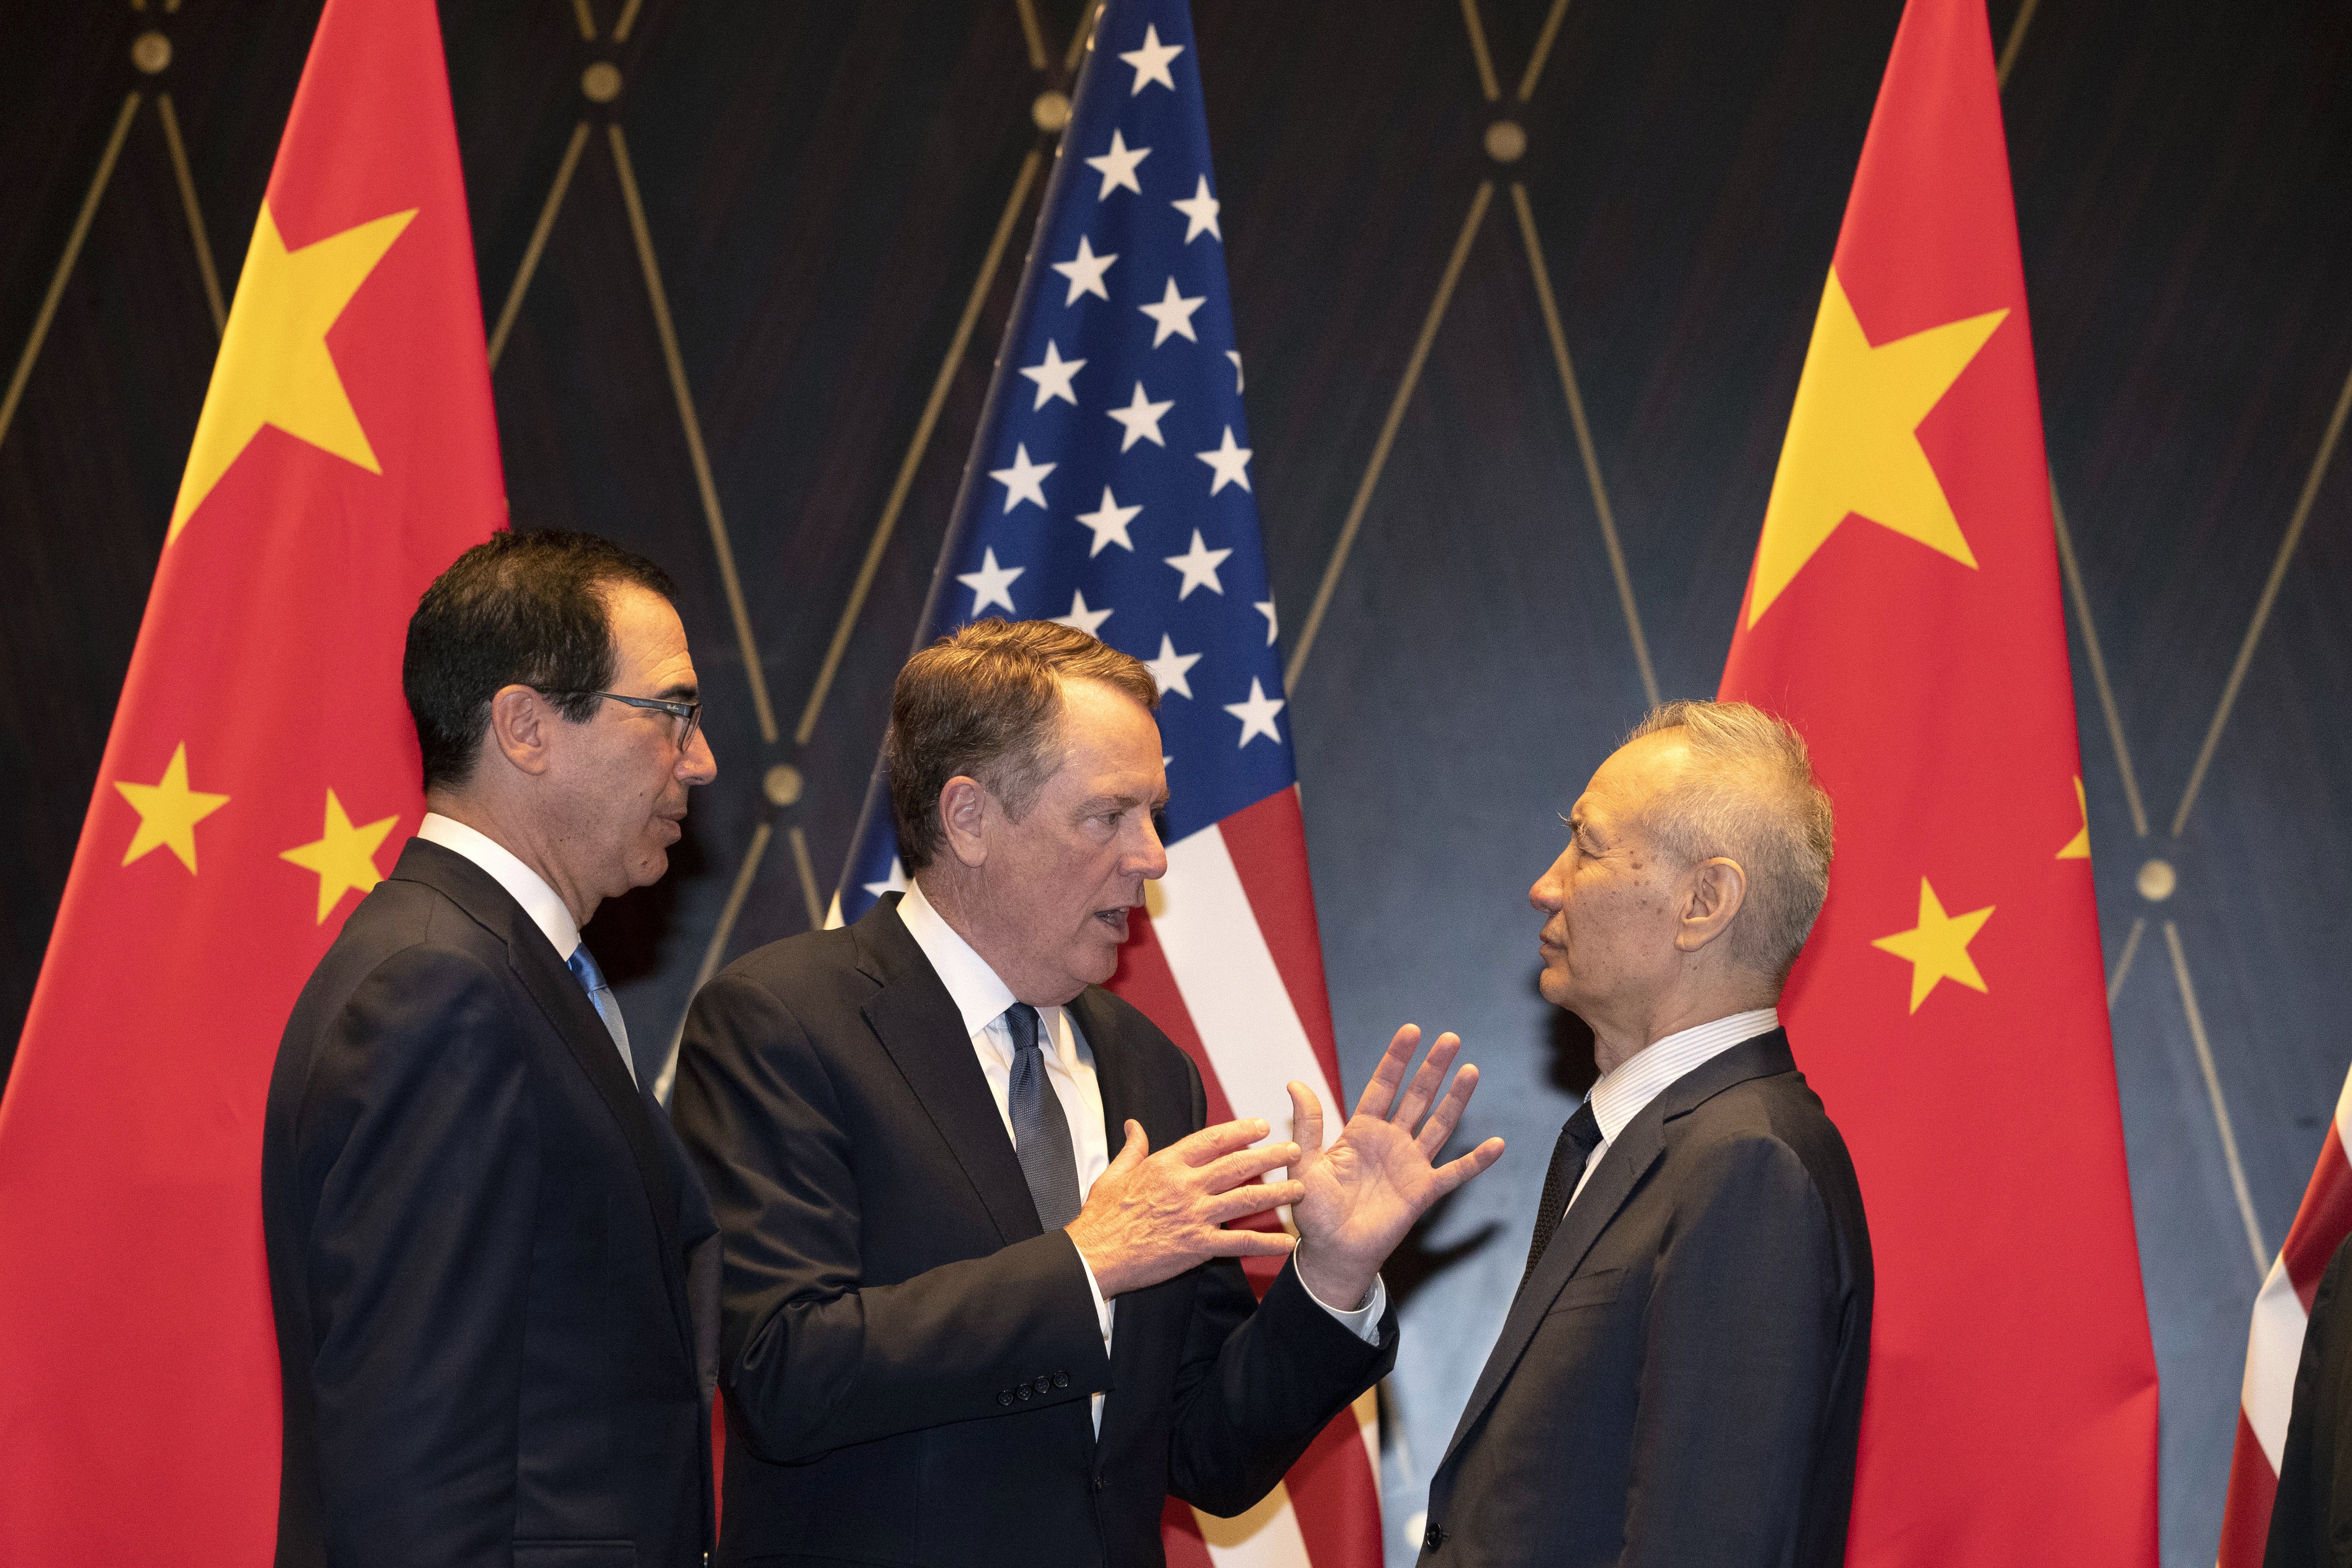 US Trade Representative Robert Lighthizer gestures as he talks to Chinese Vice-Premier Liu He, with Treasury Secretary Steven Mnuchin looking on, on July 31 in Shanghai, China. Photo: AP